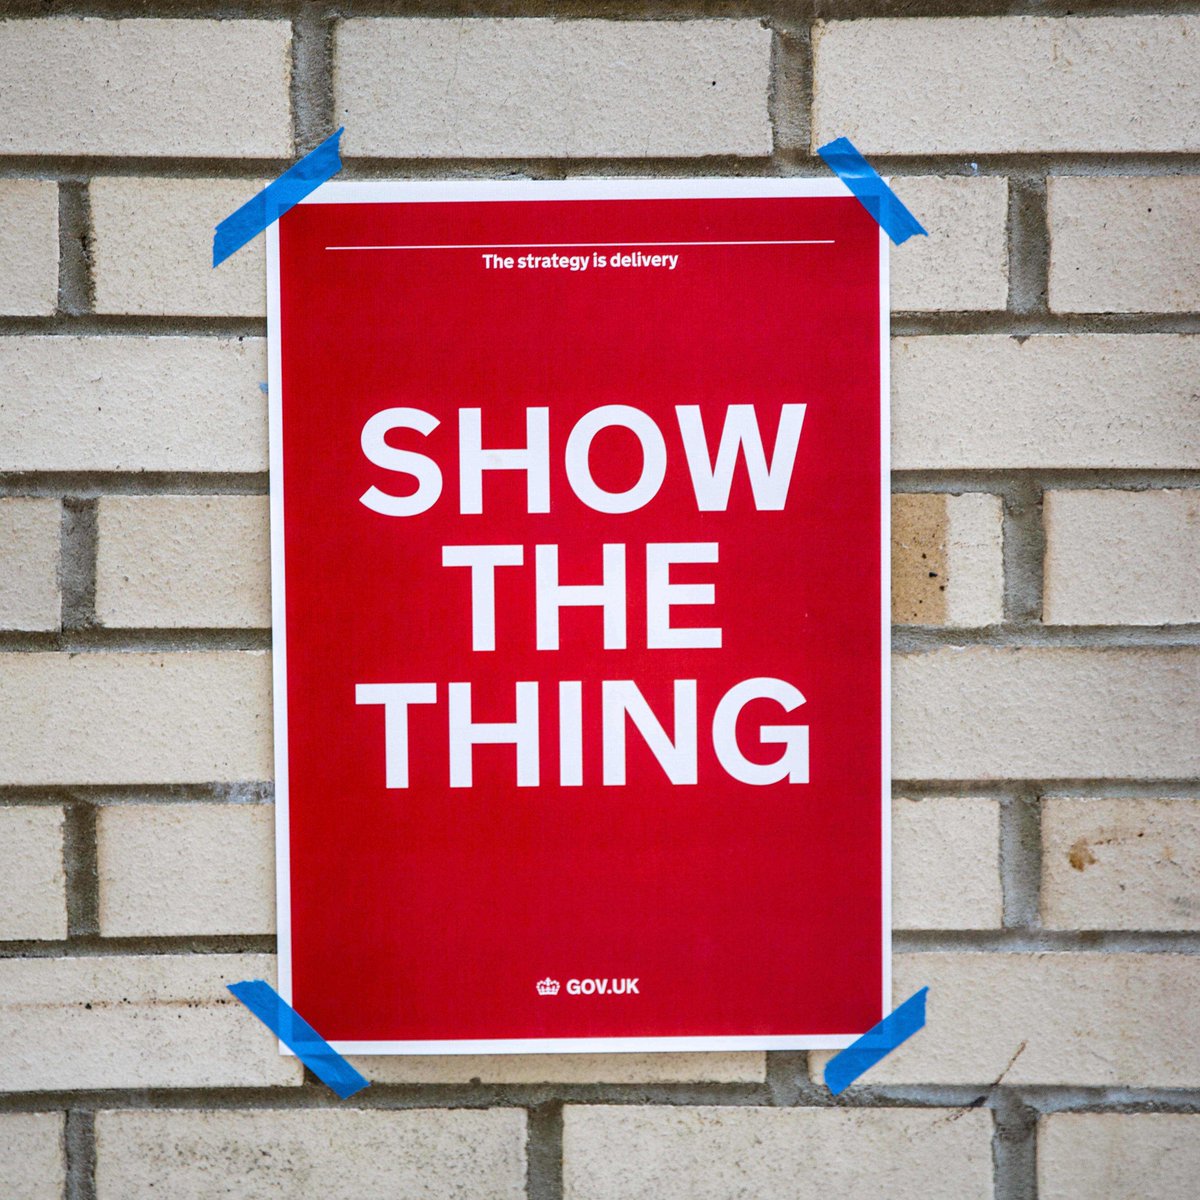 A poster taped to a wall with the words 'show the thing' prominent in the center and the words 'The strategy is delivery' in small font above and 'gov.uk' below